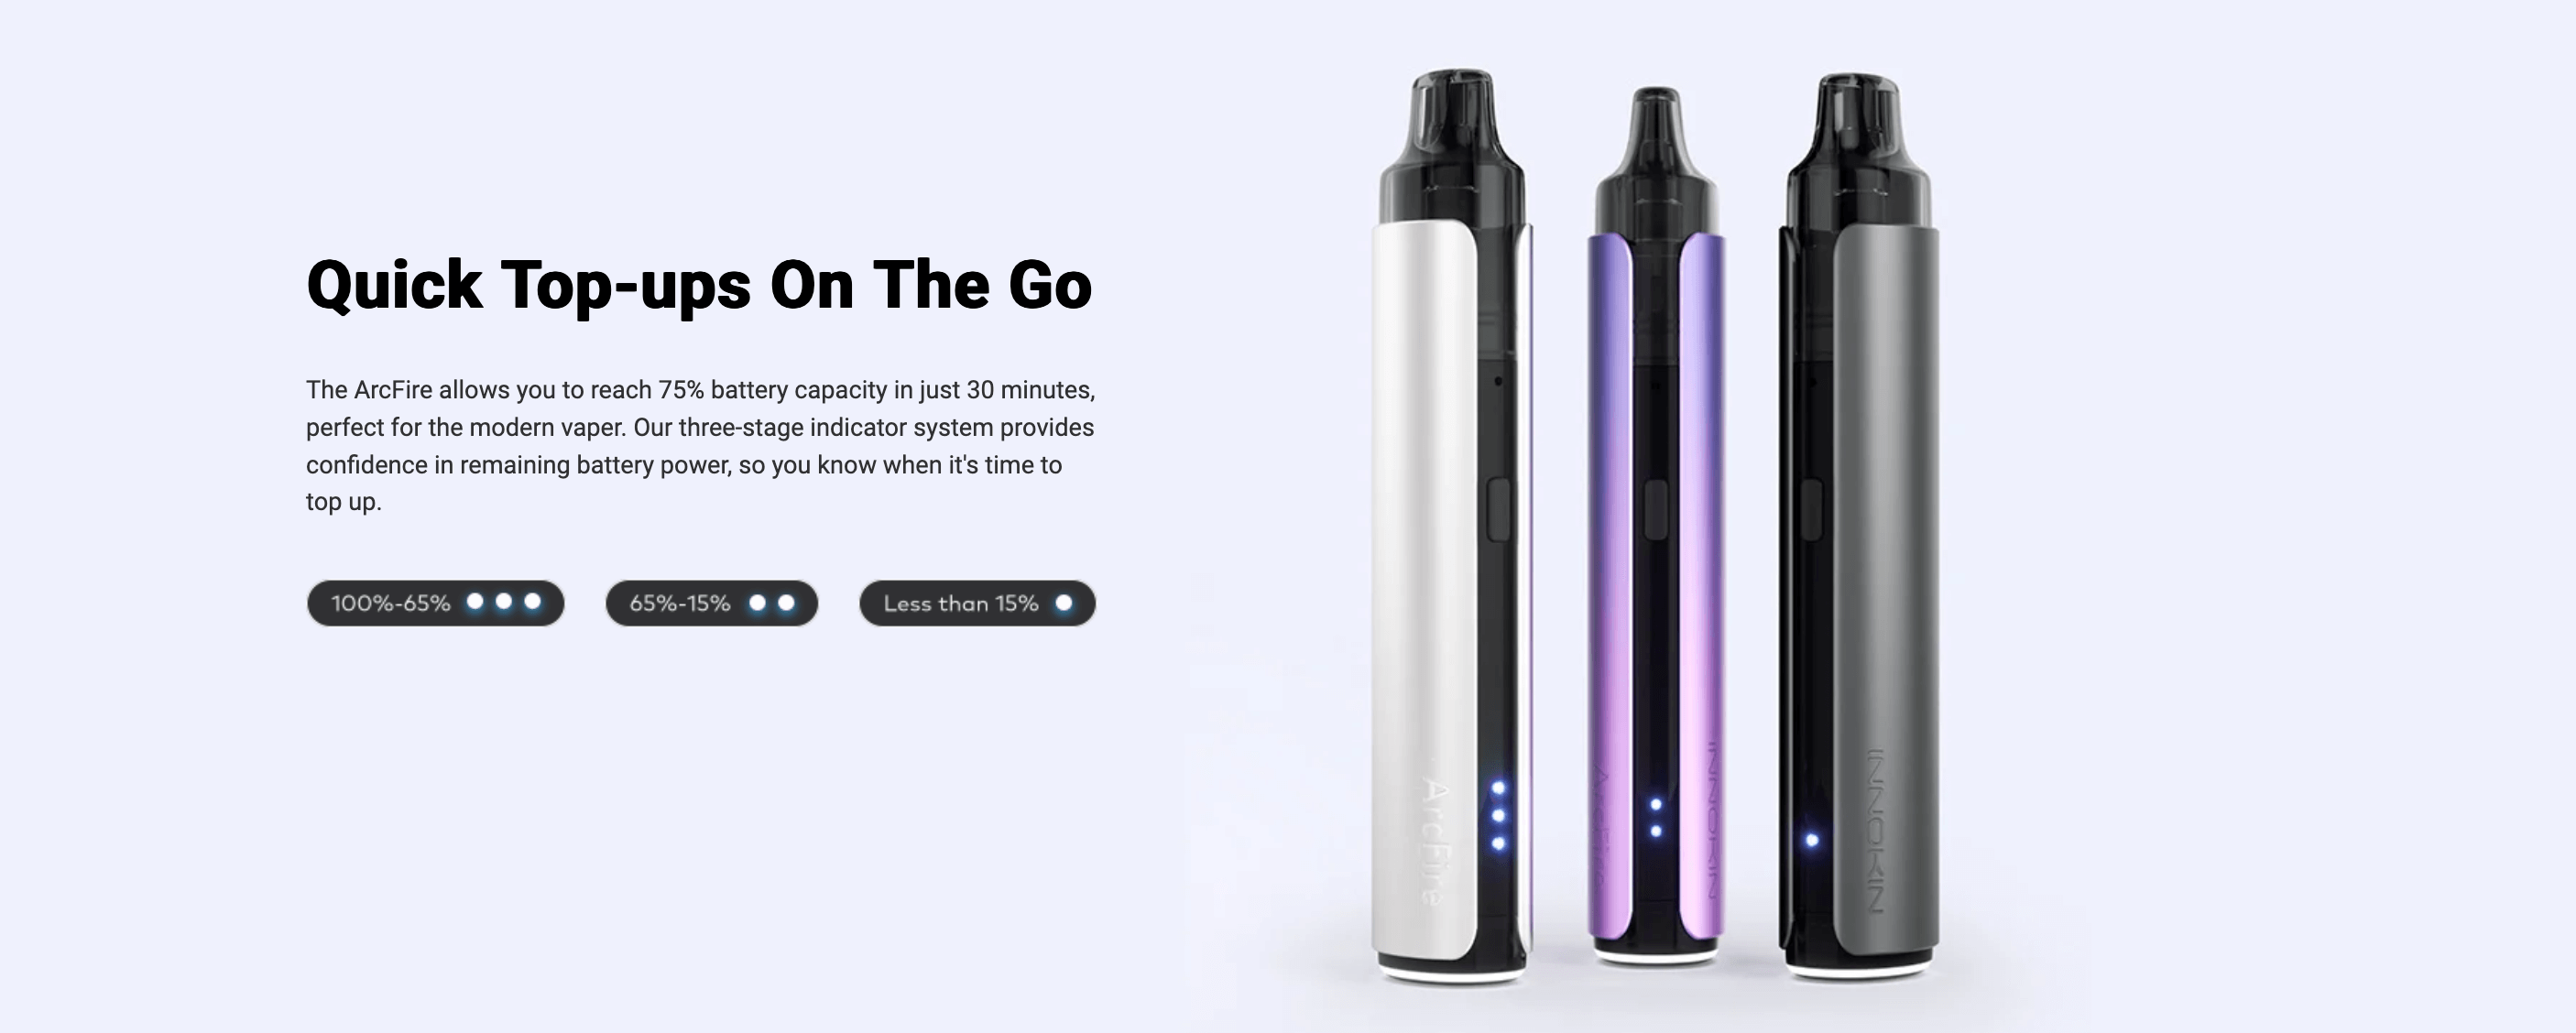 Innokin Arcfire Vape Pod Kit | Quick Top-Ups on the Go with 30 minute fast charge